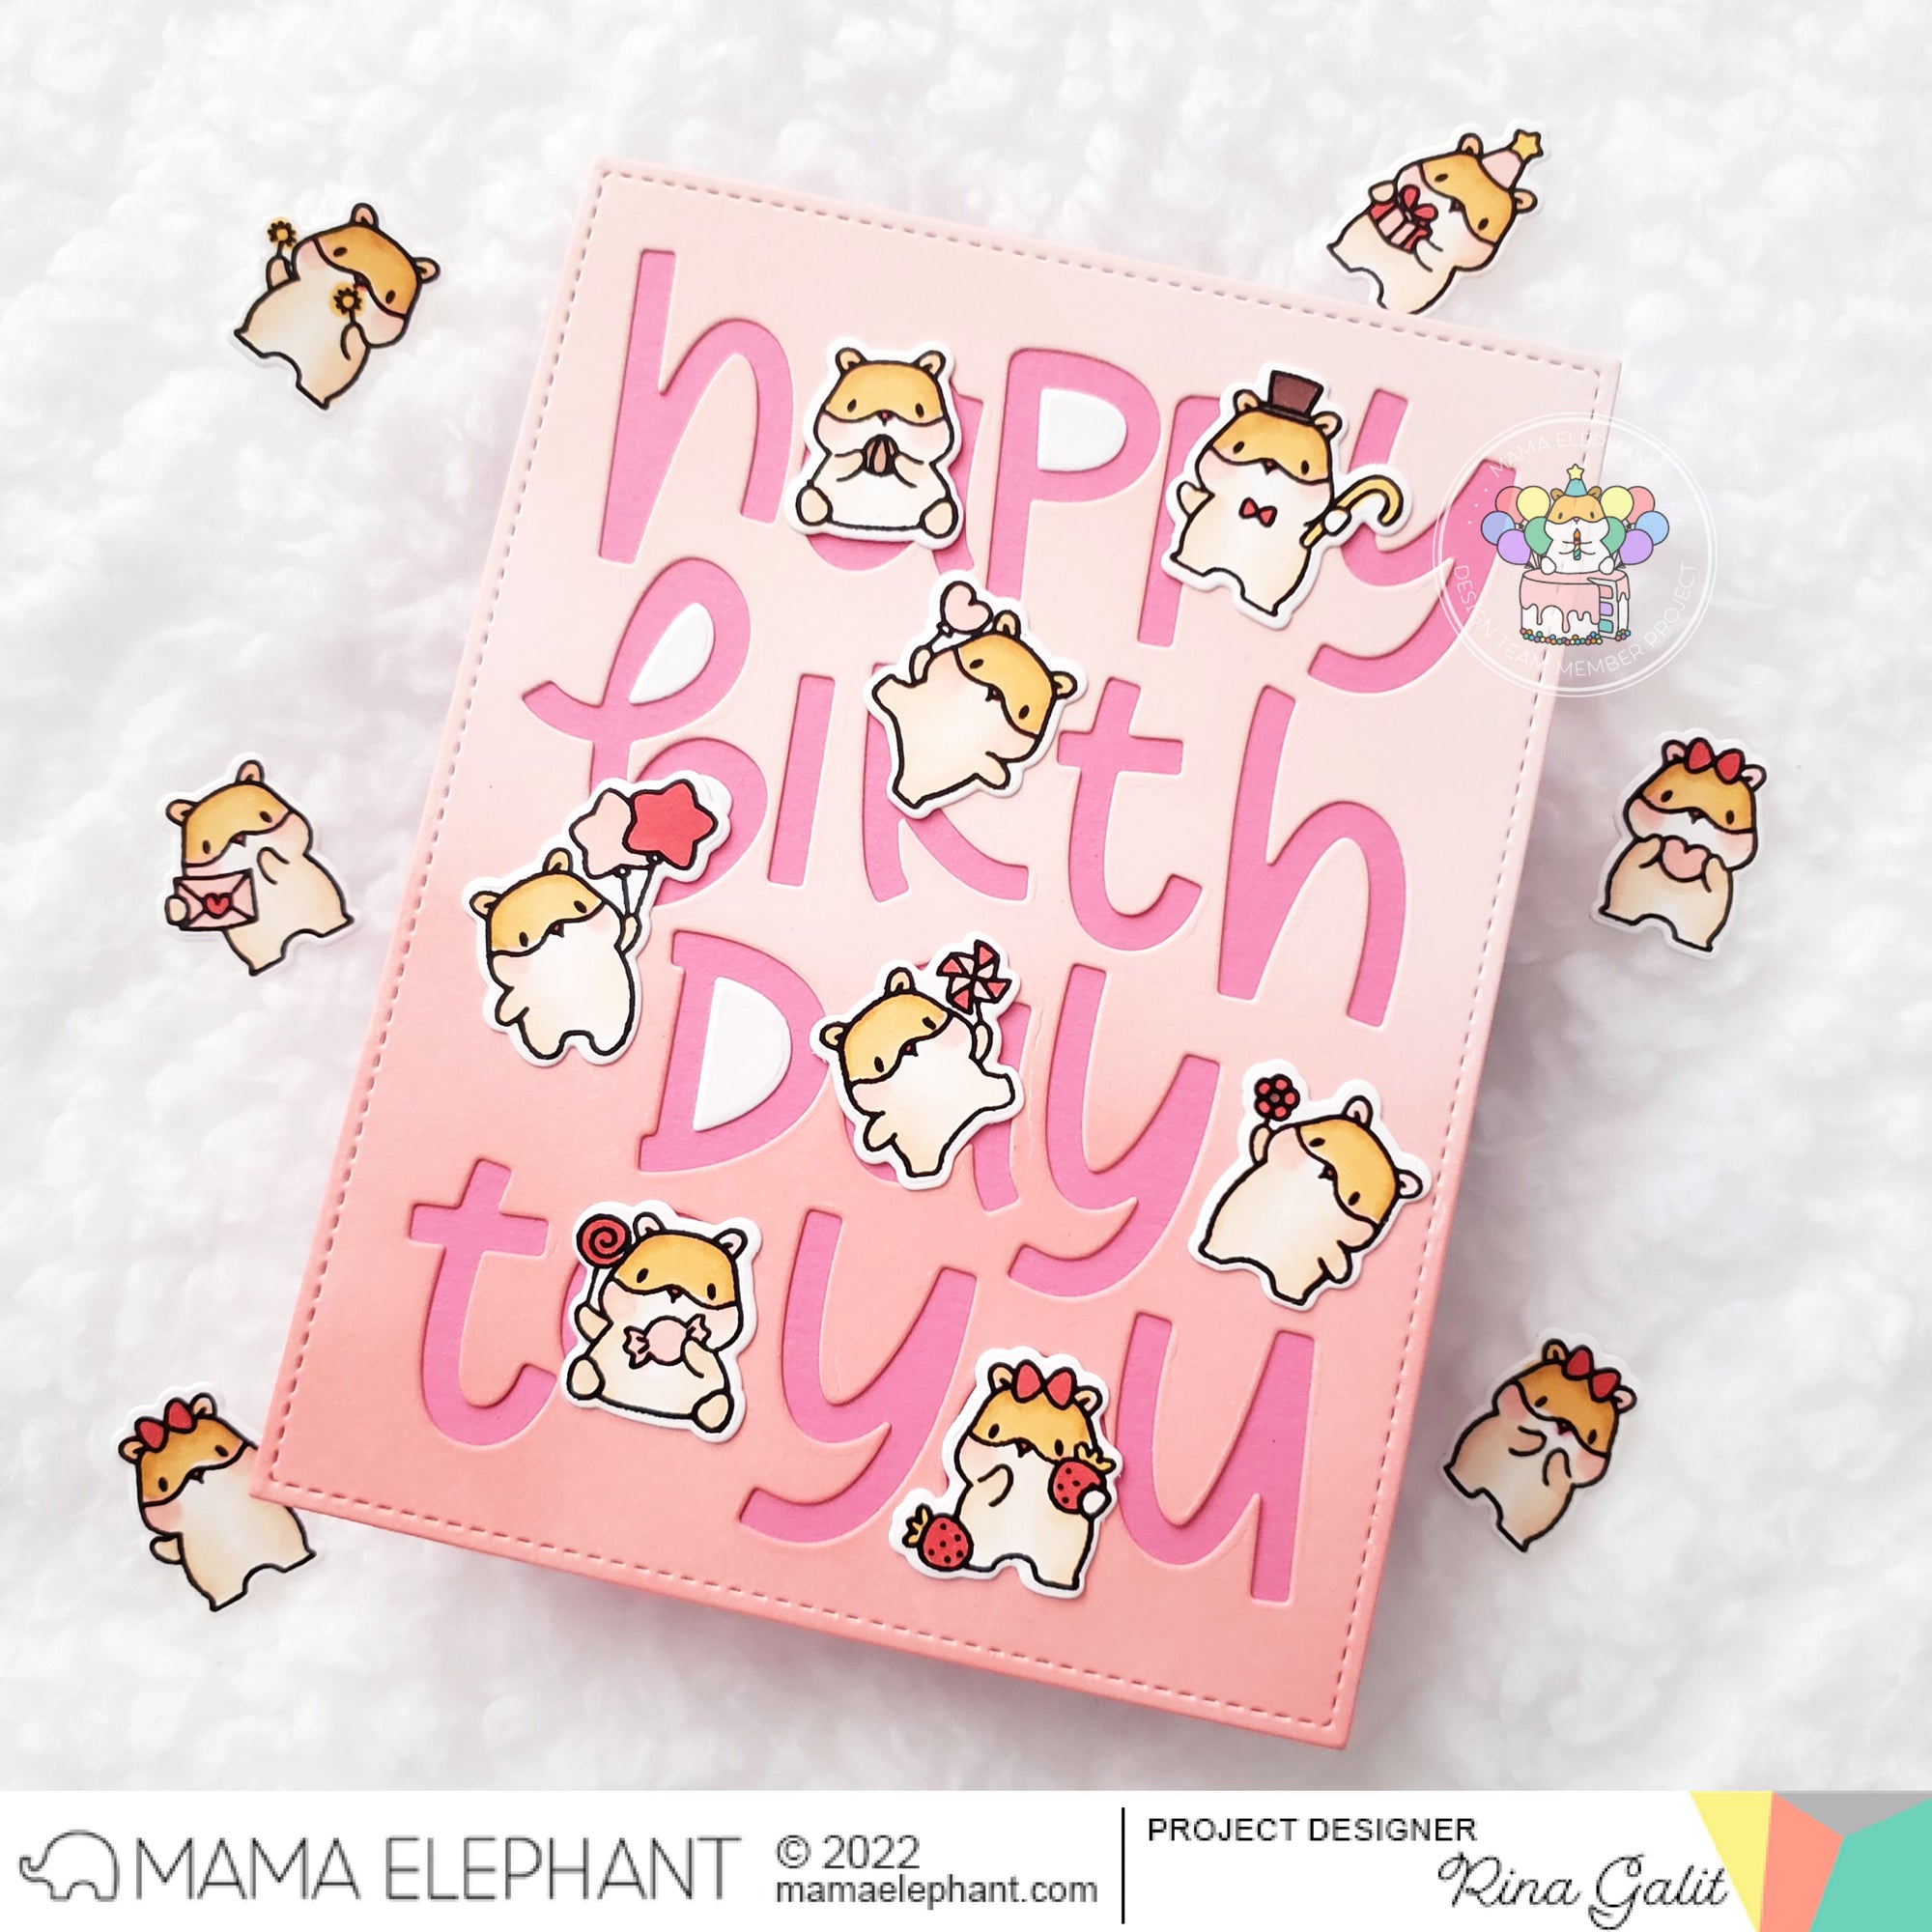 INTRODUCING: Little Hamster Agenda and Word Cover - HBTY